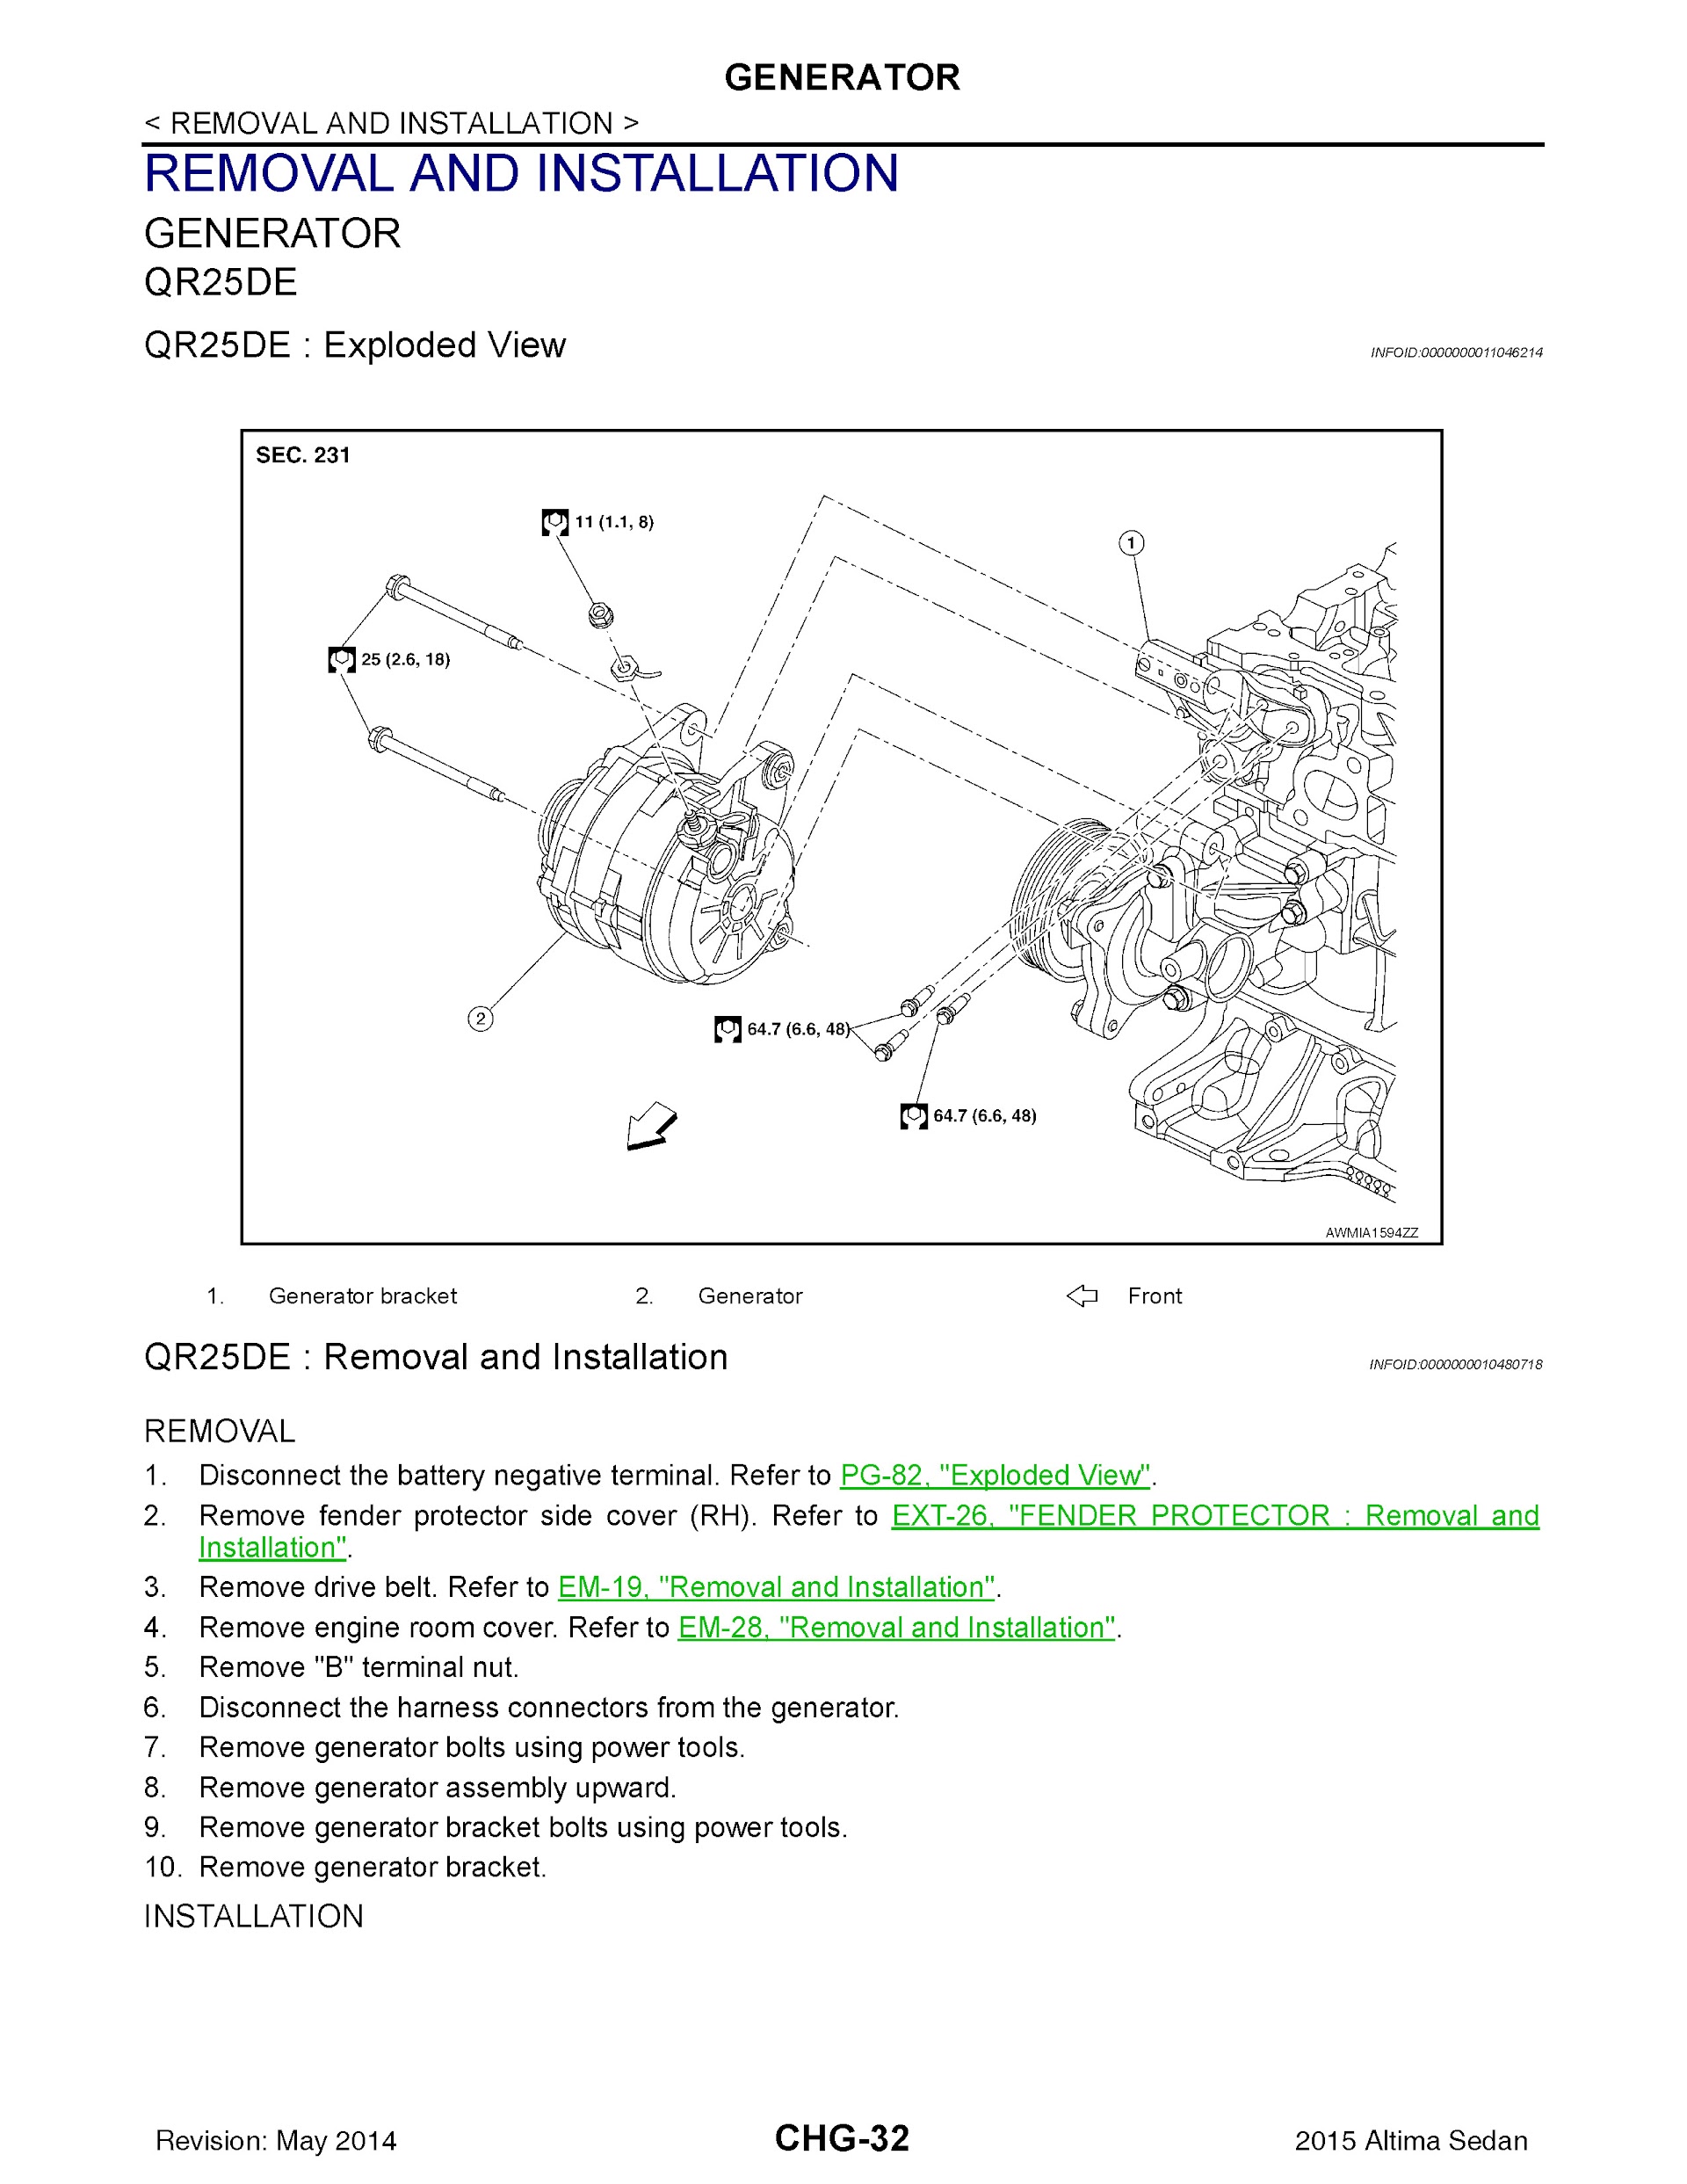 CONTENTS: 2015 Nissan Altima Repair Manual, generator removal and installation